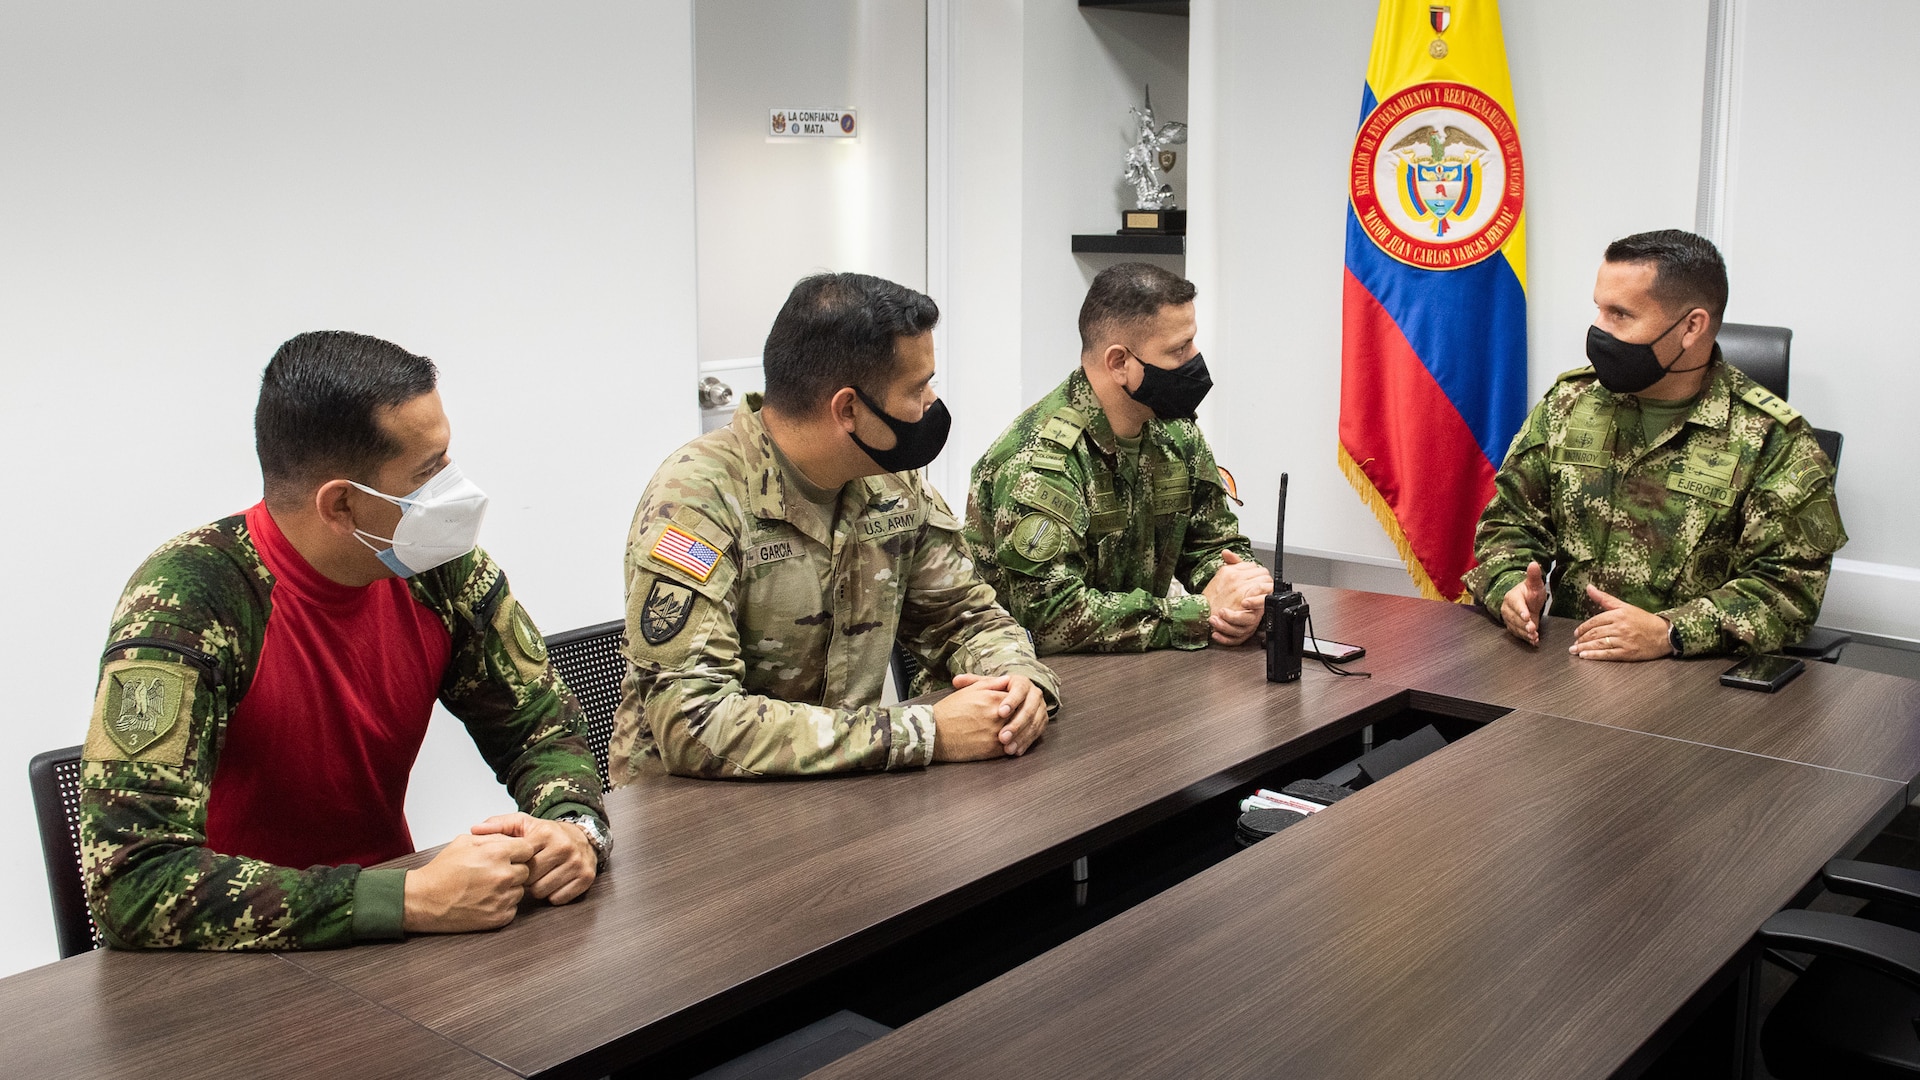 U.S. Army Chief Warrant Officer 3 Mauricio Garcia, meets with Lt. Col Milton Monroy, the Aviation Training Battalion commander, and staff at the Tolemaida Army Base, Colombia.